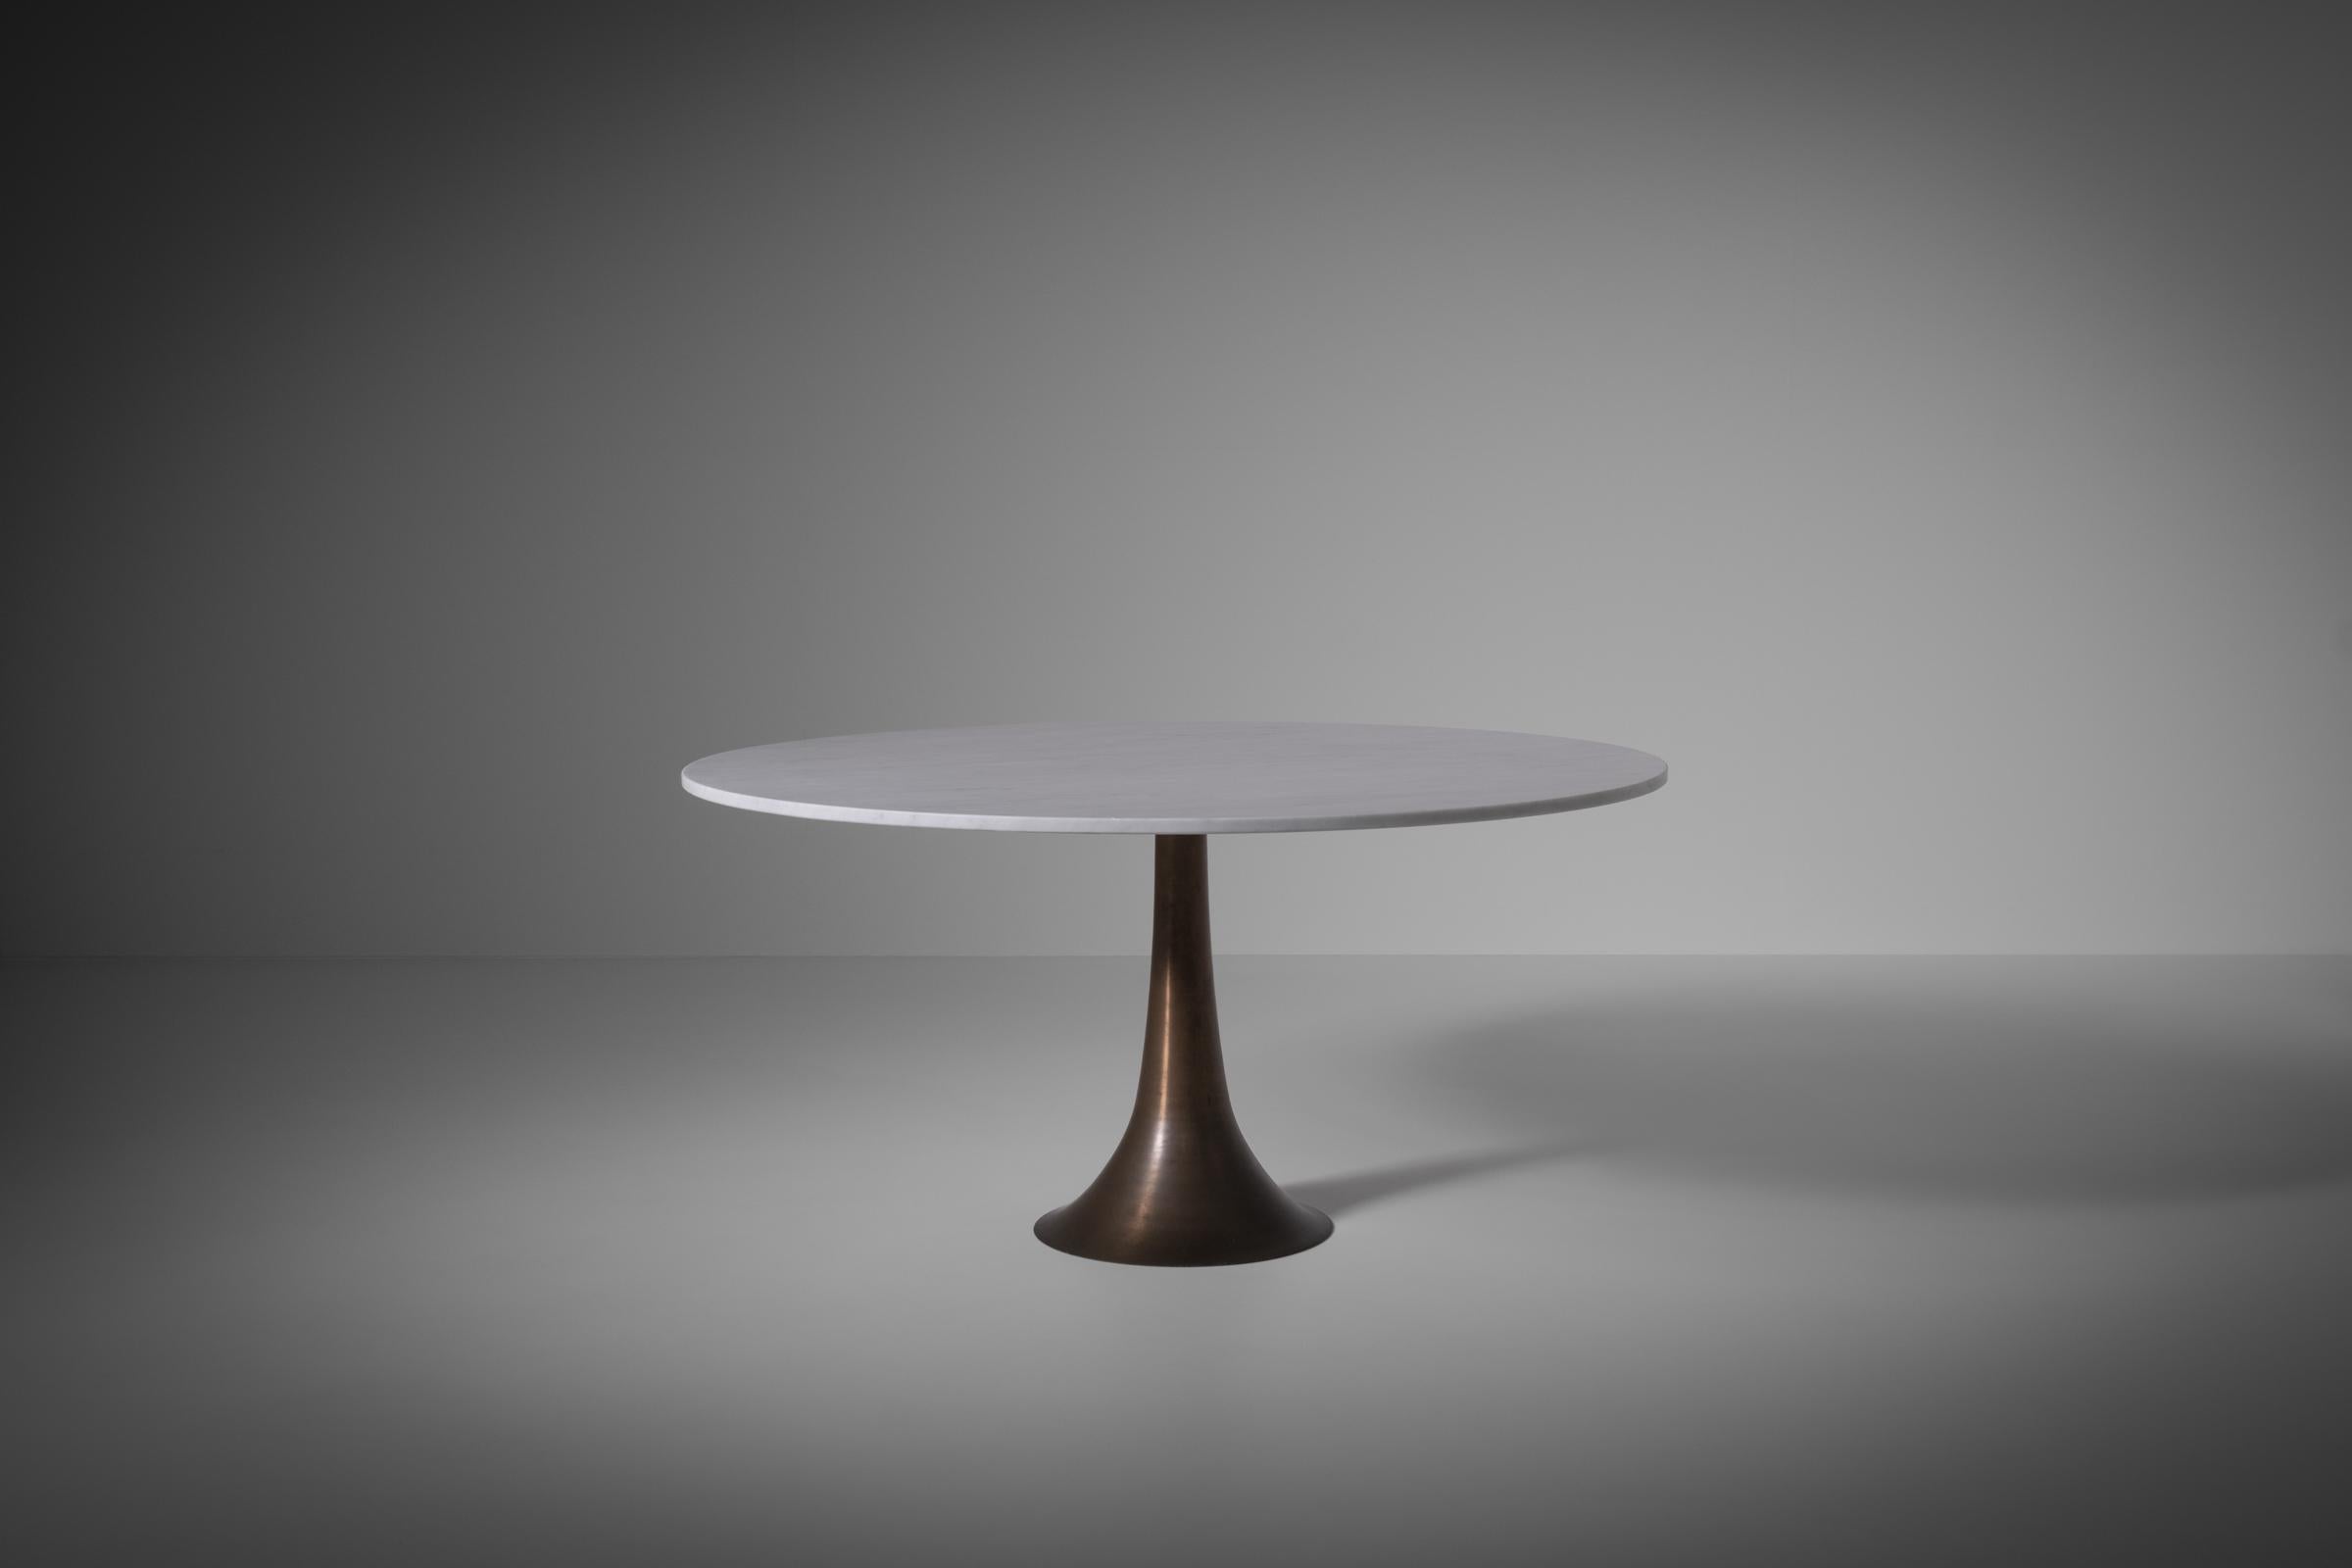 Sculptural dining table mod. 302 by Angelo Mangiarotti For Bernini, Italy 1959. Beautiful design consisting of a stunning large Carrara marble top on a refined cast bronze trumpet base, manufactured by the Battaglia foundry in Milan. The marble used